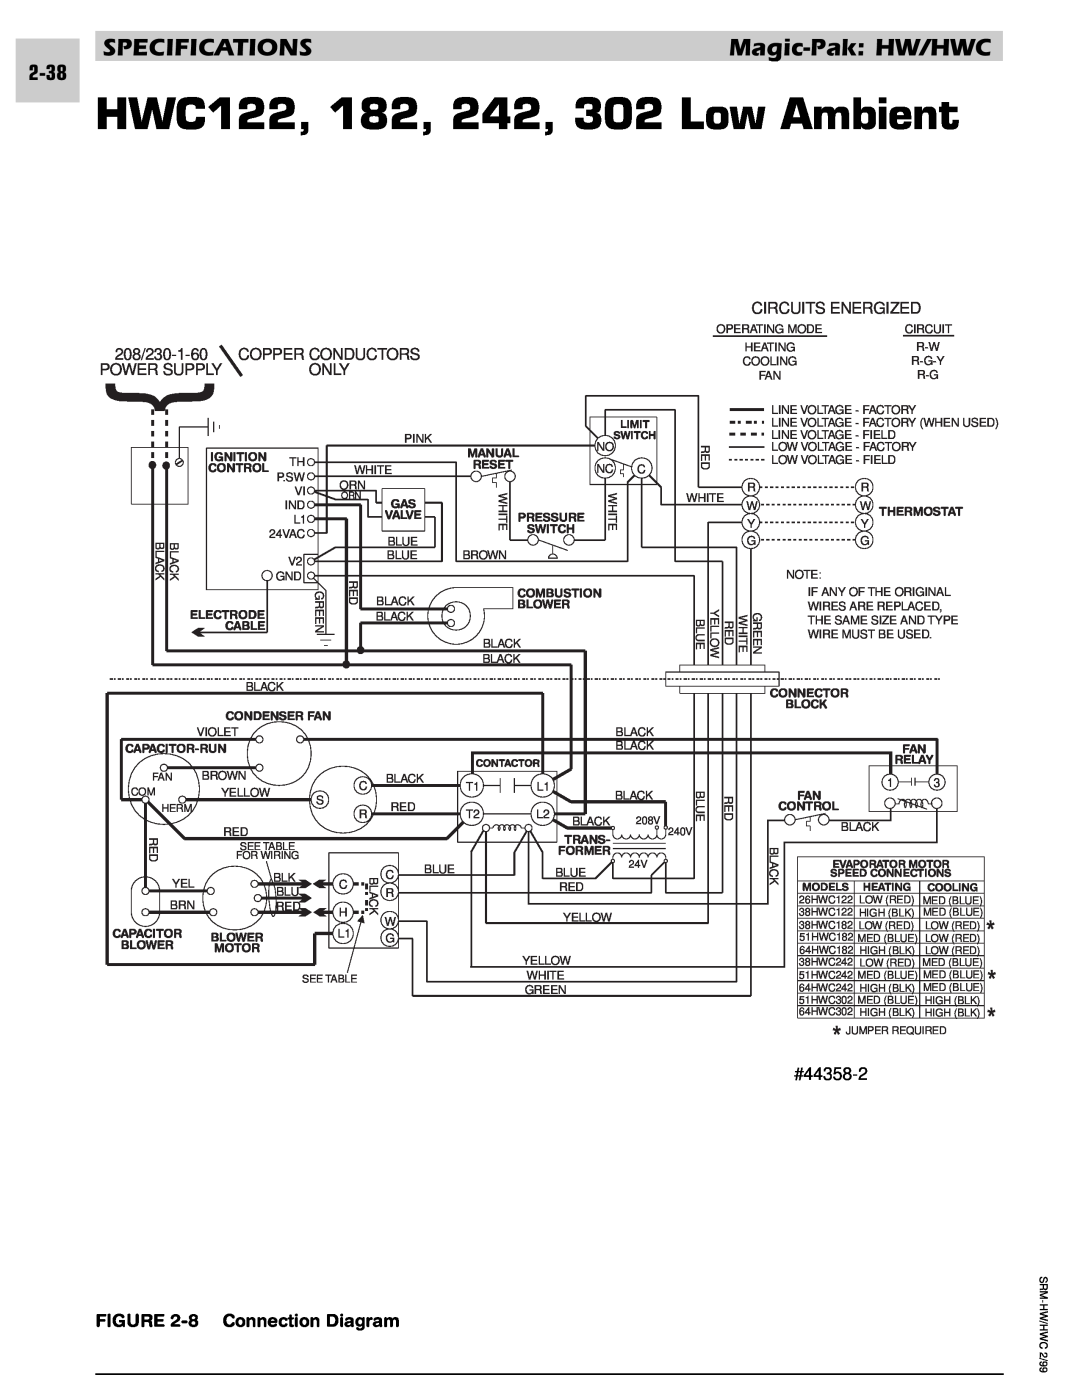 Armstrong World Industries 243, 123, 203, 183 manual HWC122, 182, 242, 302 Low Ambient, 8 Connection Diagram 